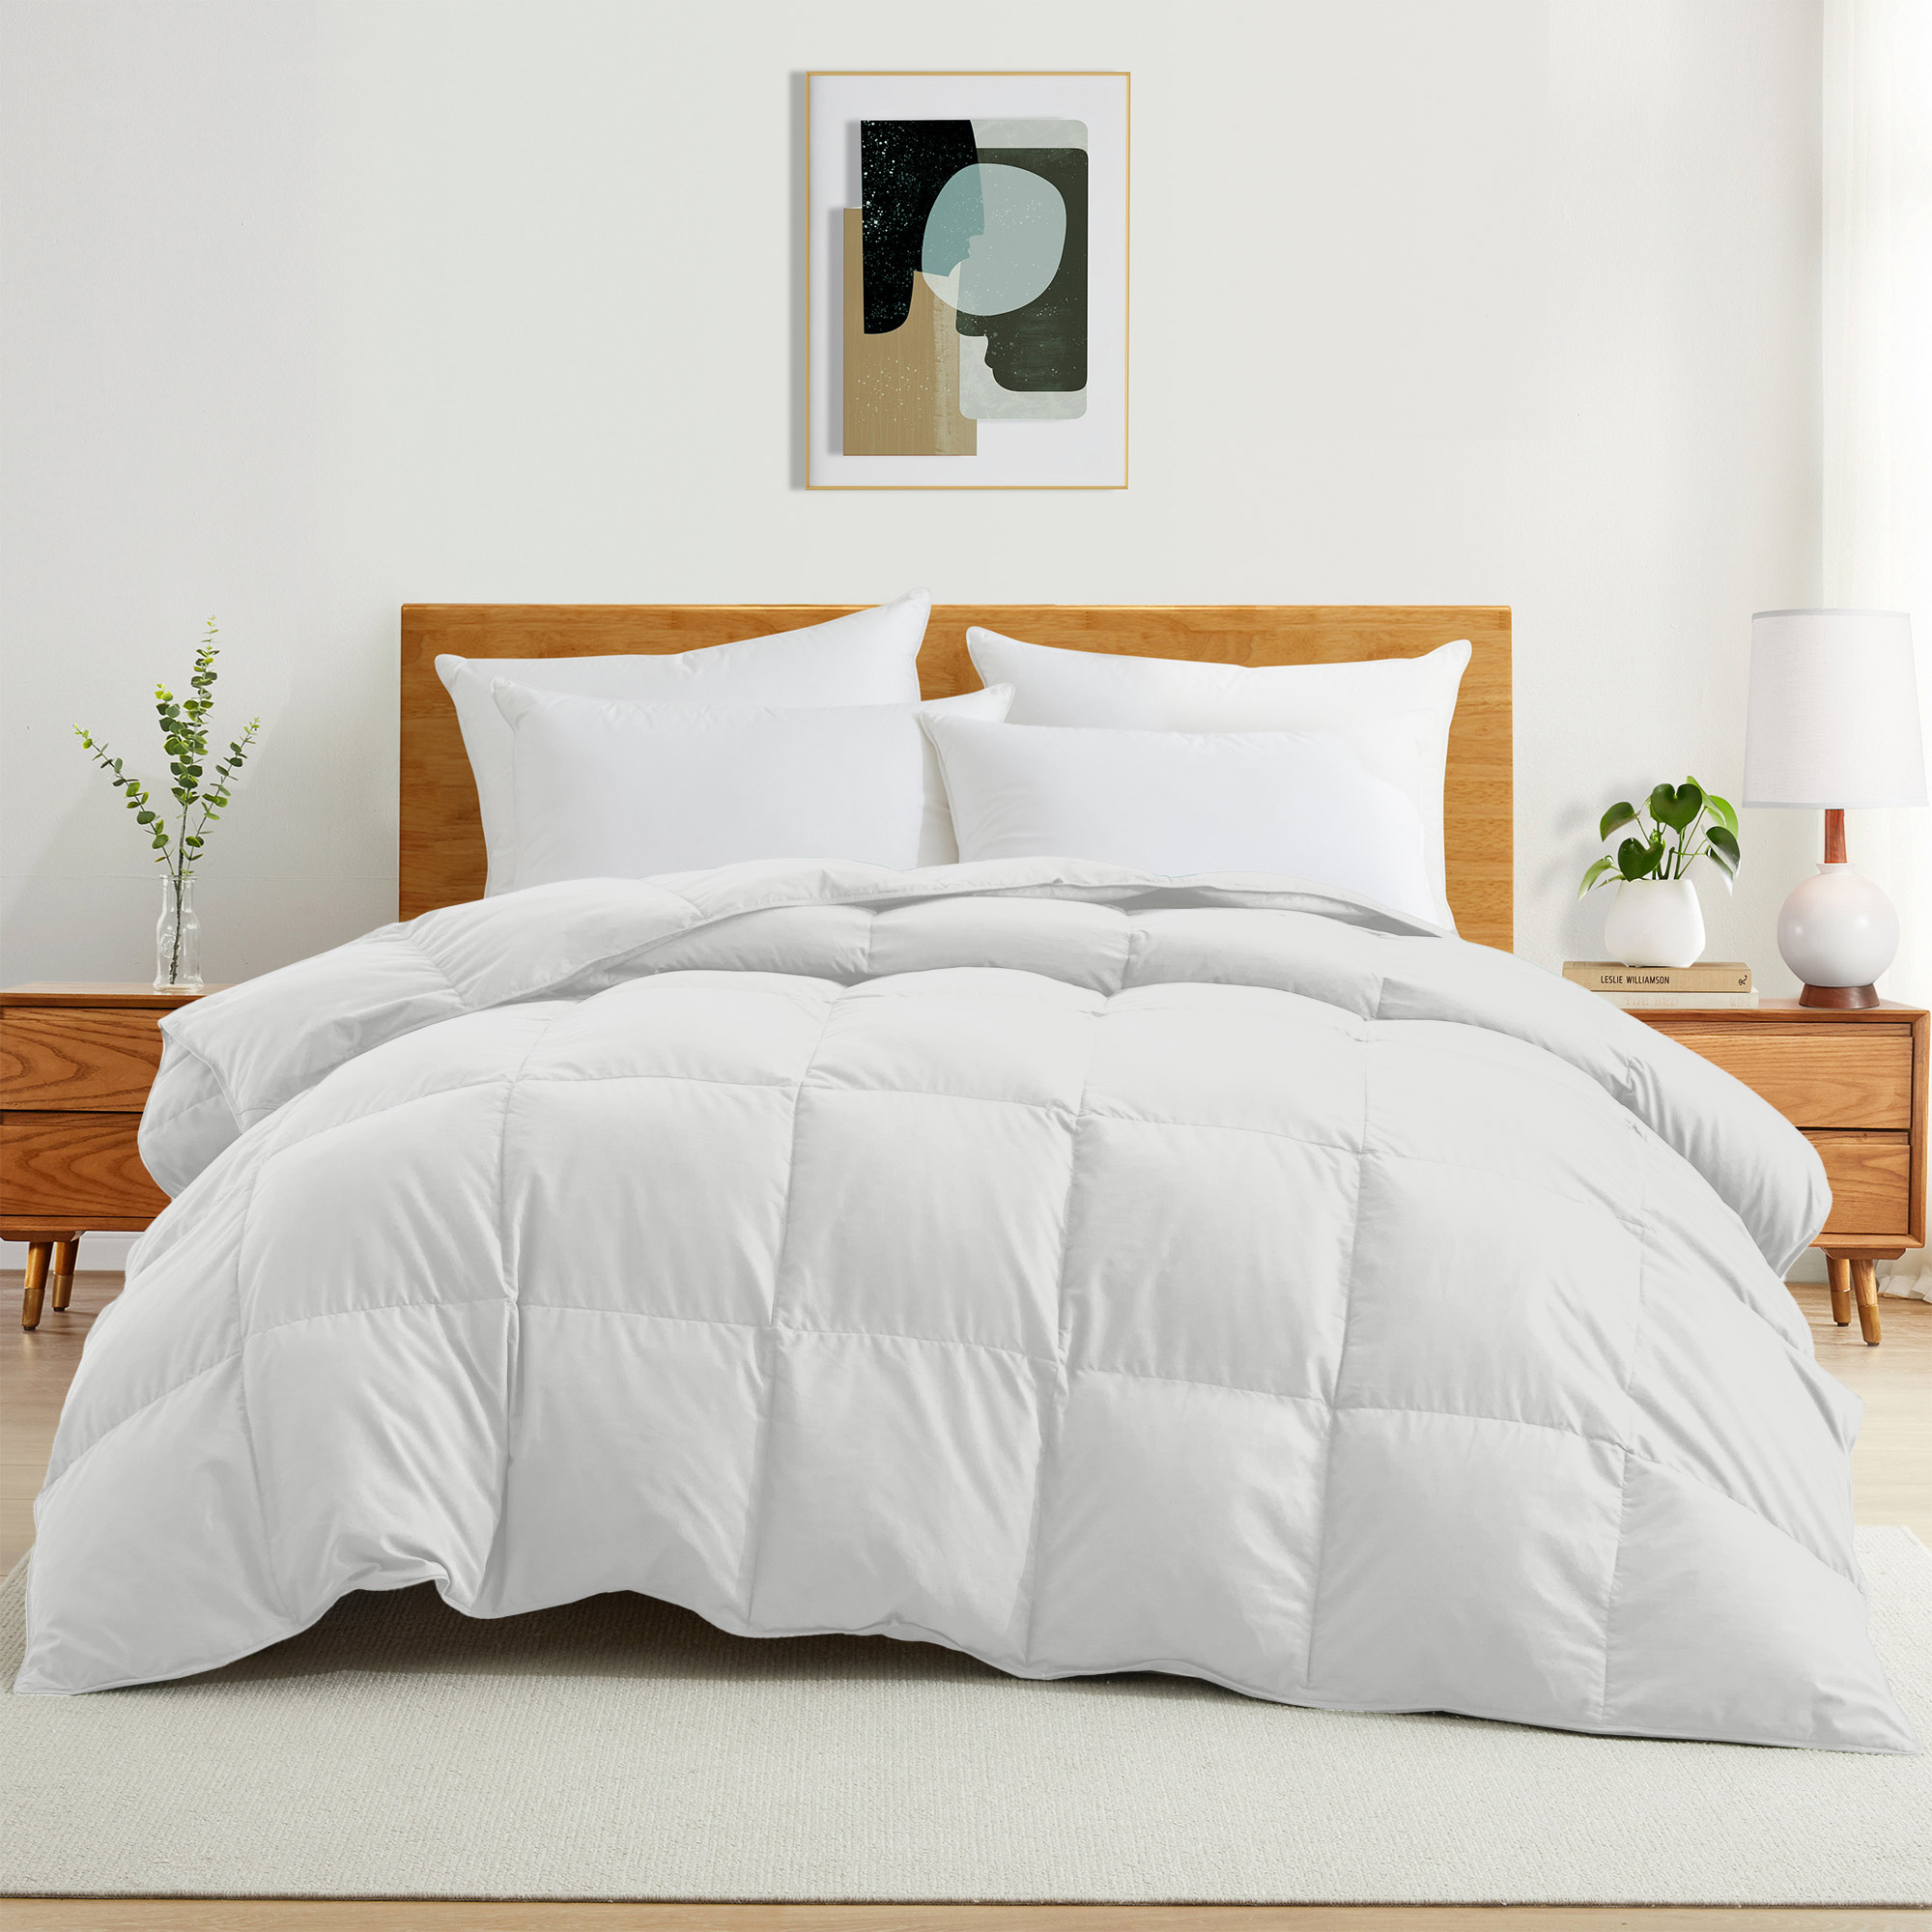 All Seasons Goose Down Feather Comforter Ultra Soft Comforter With Peach Skin Fabric - White, King-104*88